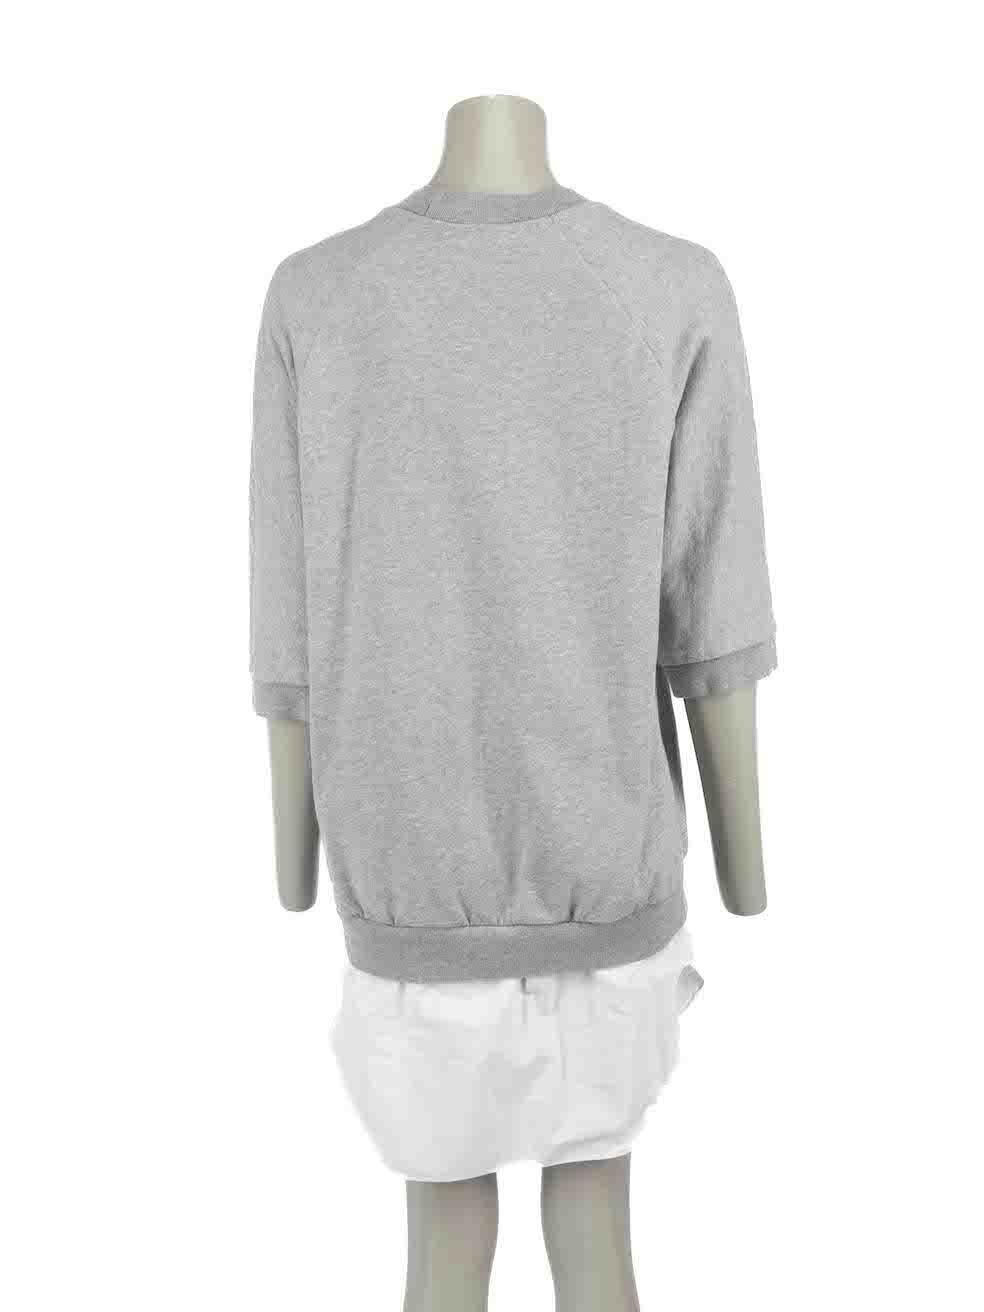 3.1 Phillip Lim Grey Cotton Shirt-Layered Jumper Size S In Excellent Condition For Sale In London, GB